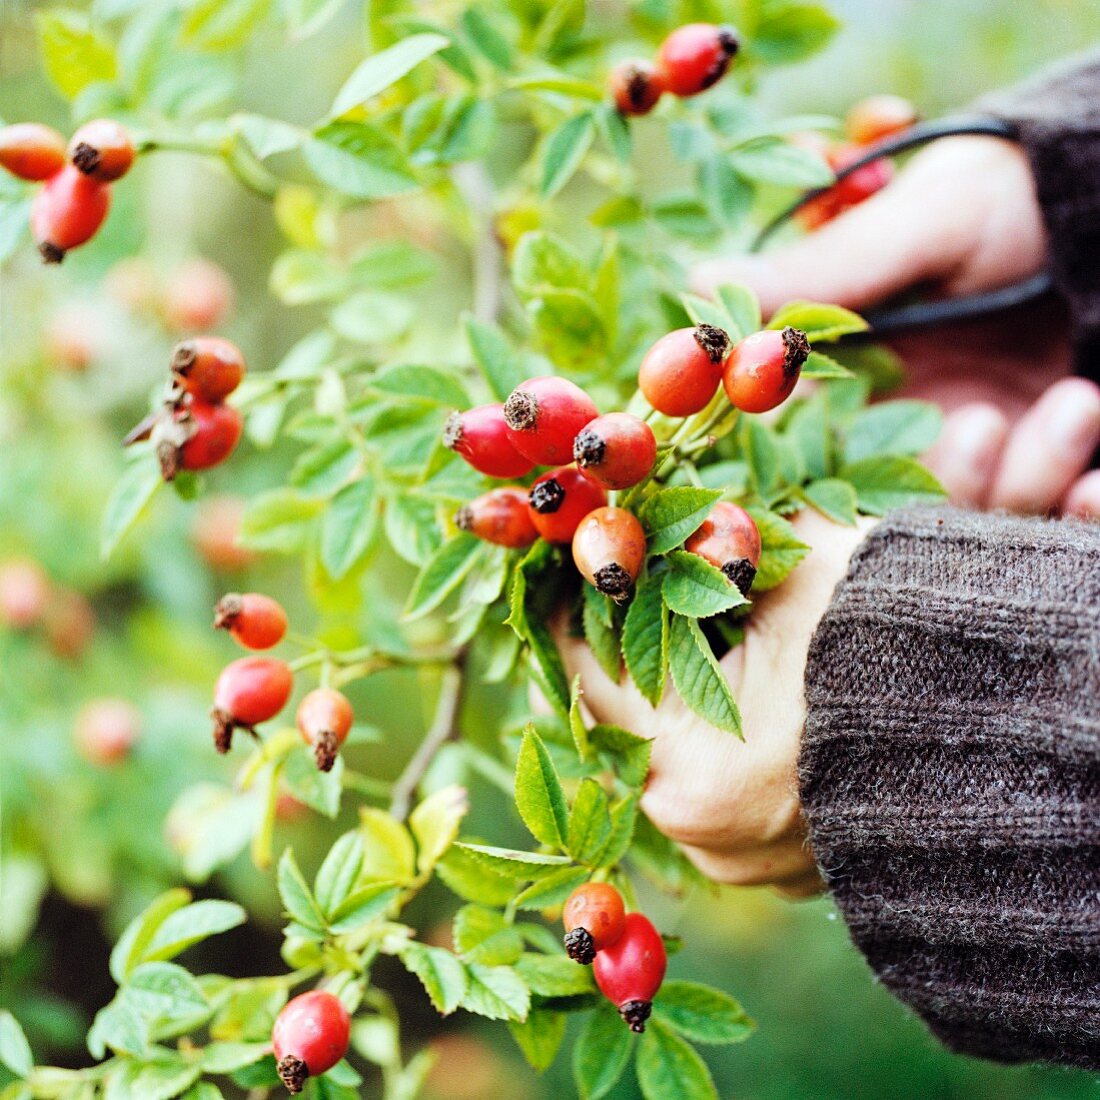 Hands cutting rose hips from the bush